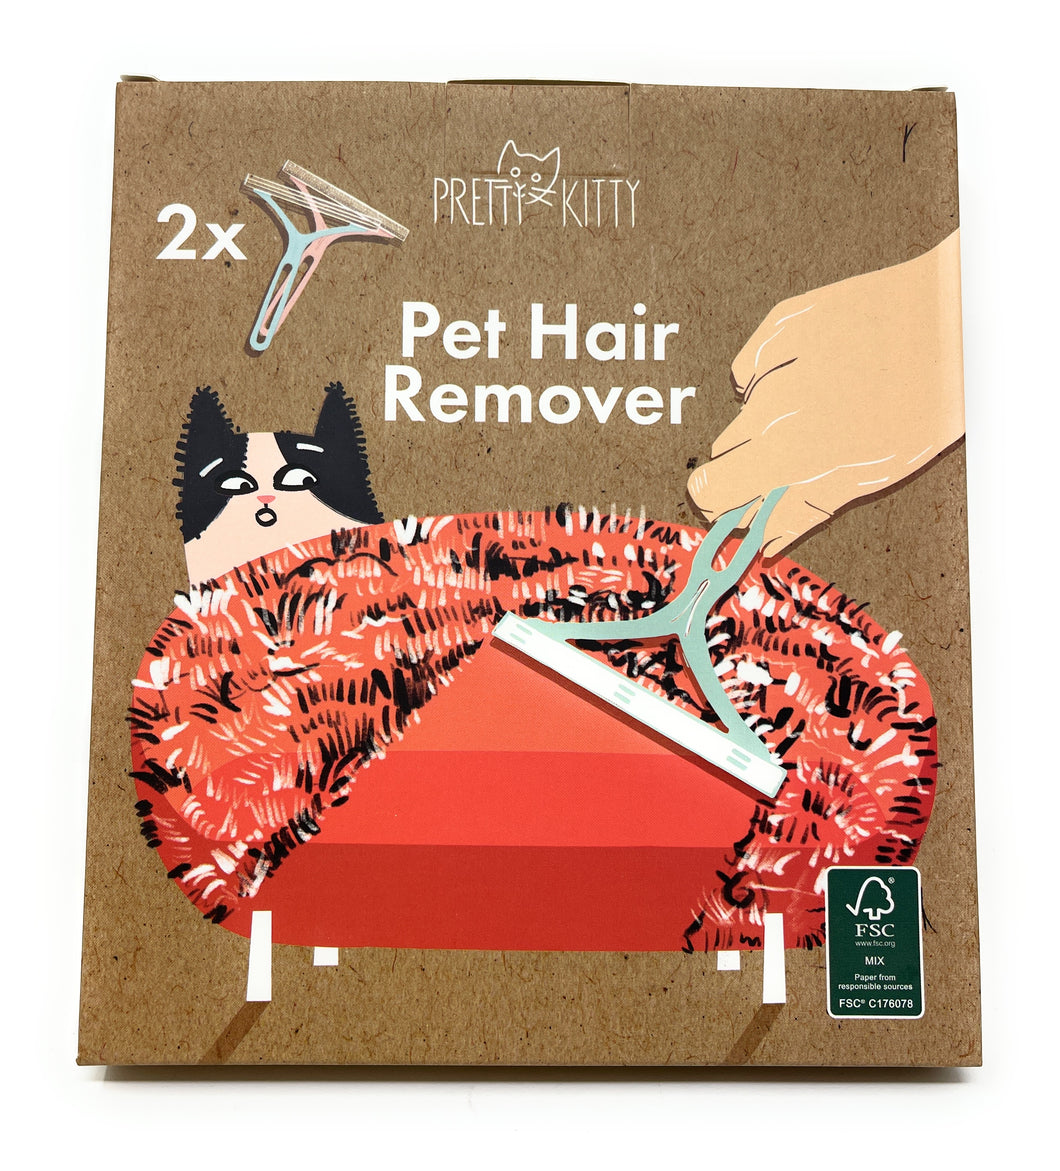 Set of 2 Pretty Kitty Pet Hair Removers For Aminal Fur, Dust, and Lint on Sofas, Carpets, or Beds.